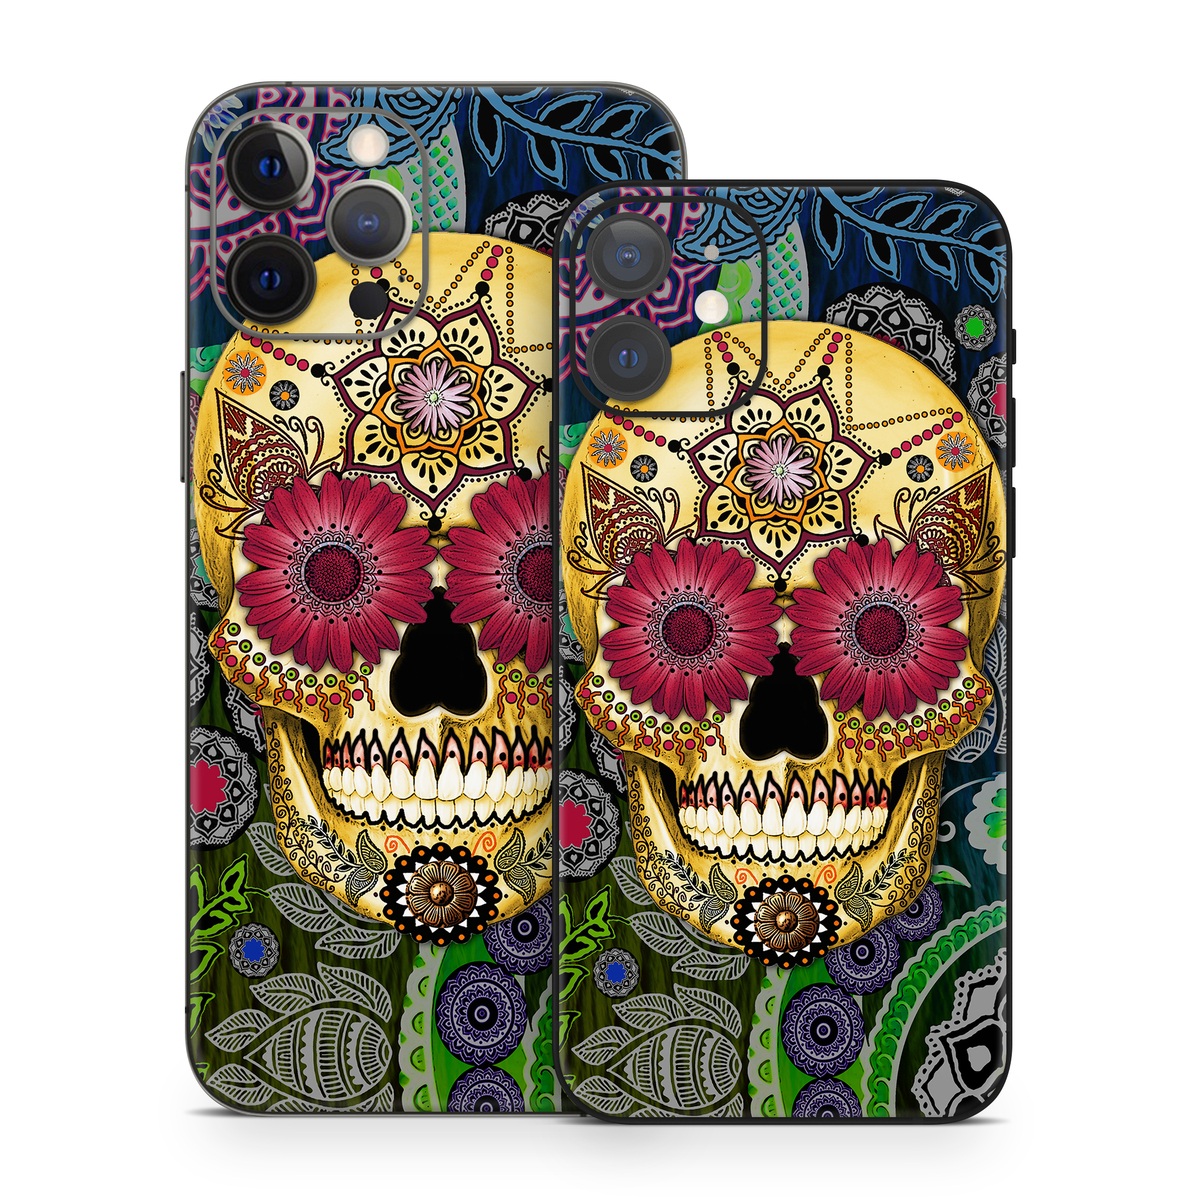 iPhone 12 Series Skin design of Skull, Bone, Pattern, Psychedelic art, Visual arts, Design, Illustration, Art, Textile, Plant, with black, red, gray, green, blue colors